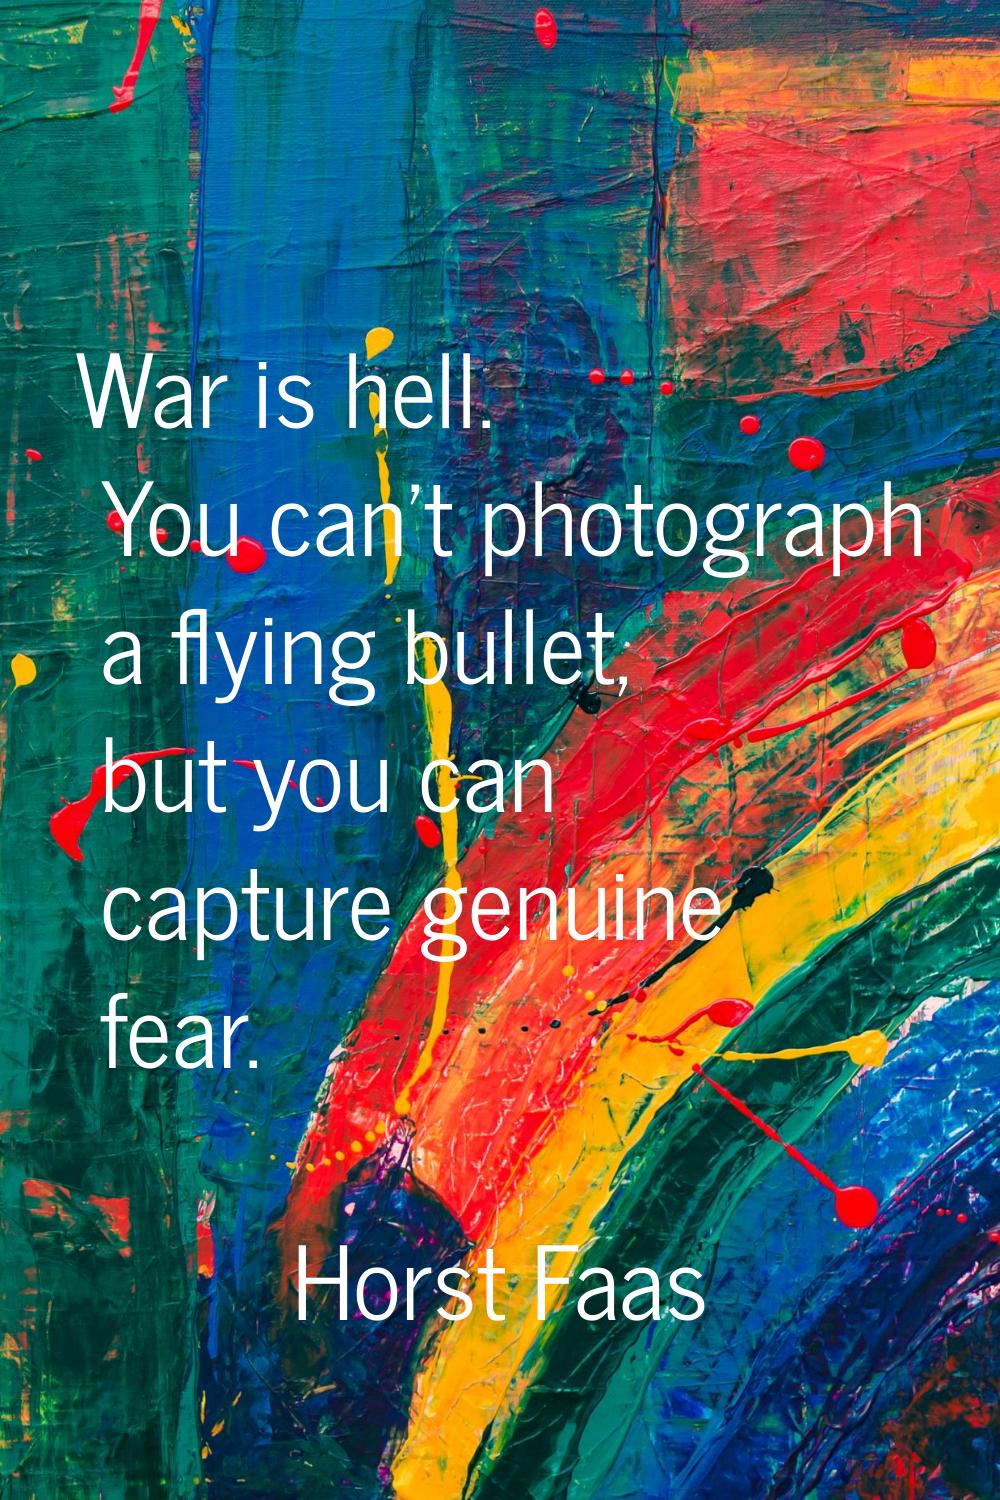 War is hell. You can't photograph a flying bullet, but you can capture genuine fear.